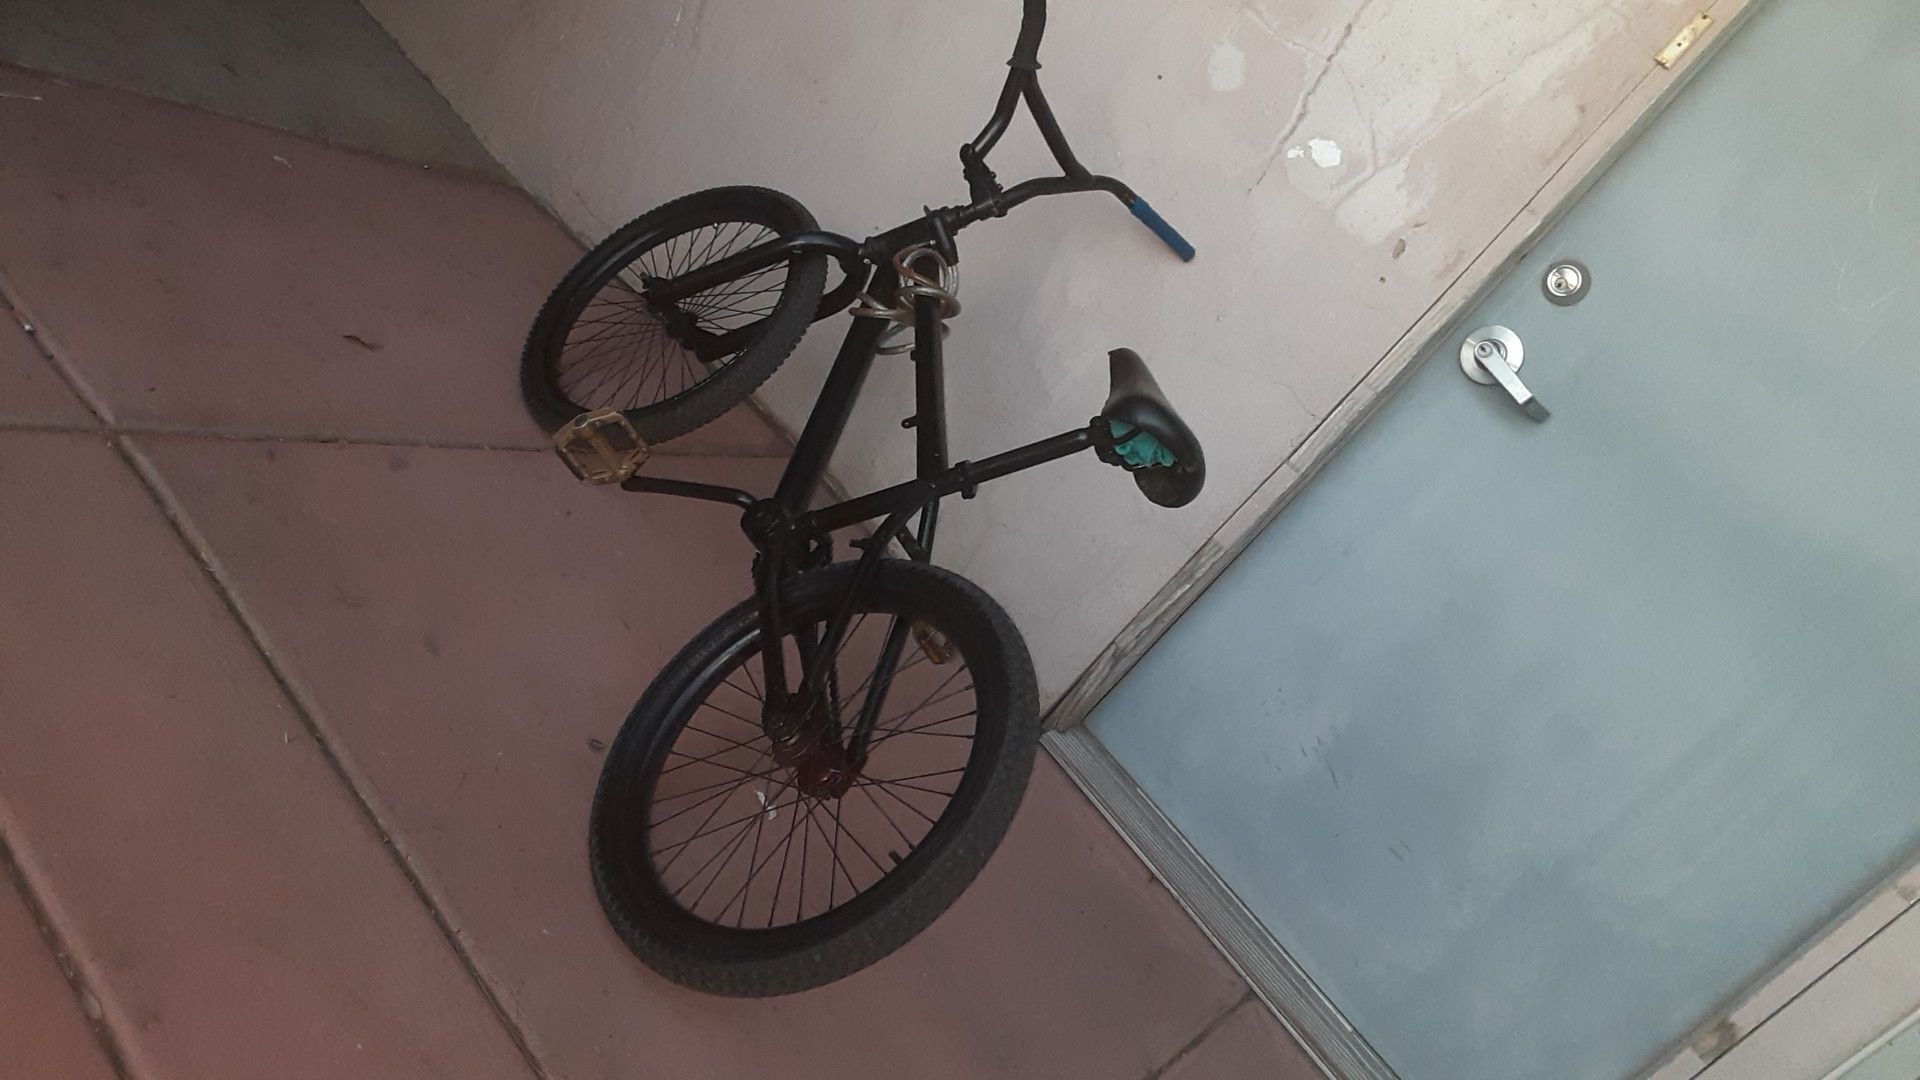 Mongoose 20" inch BMX BIKE , only $20!